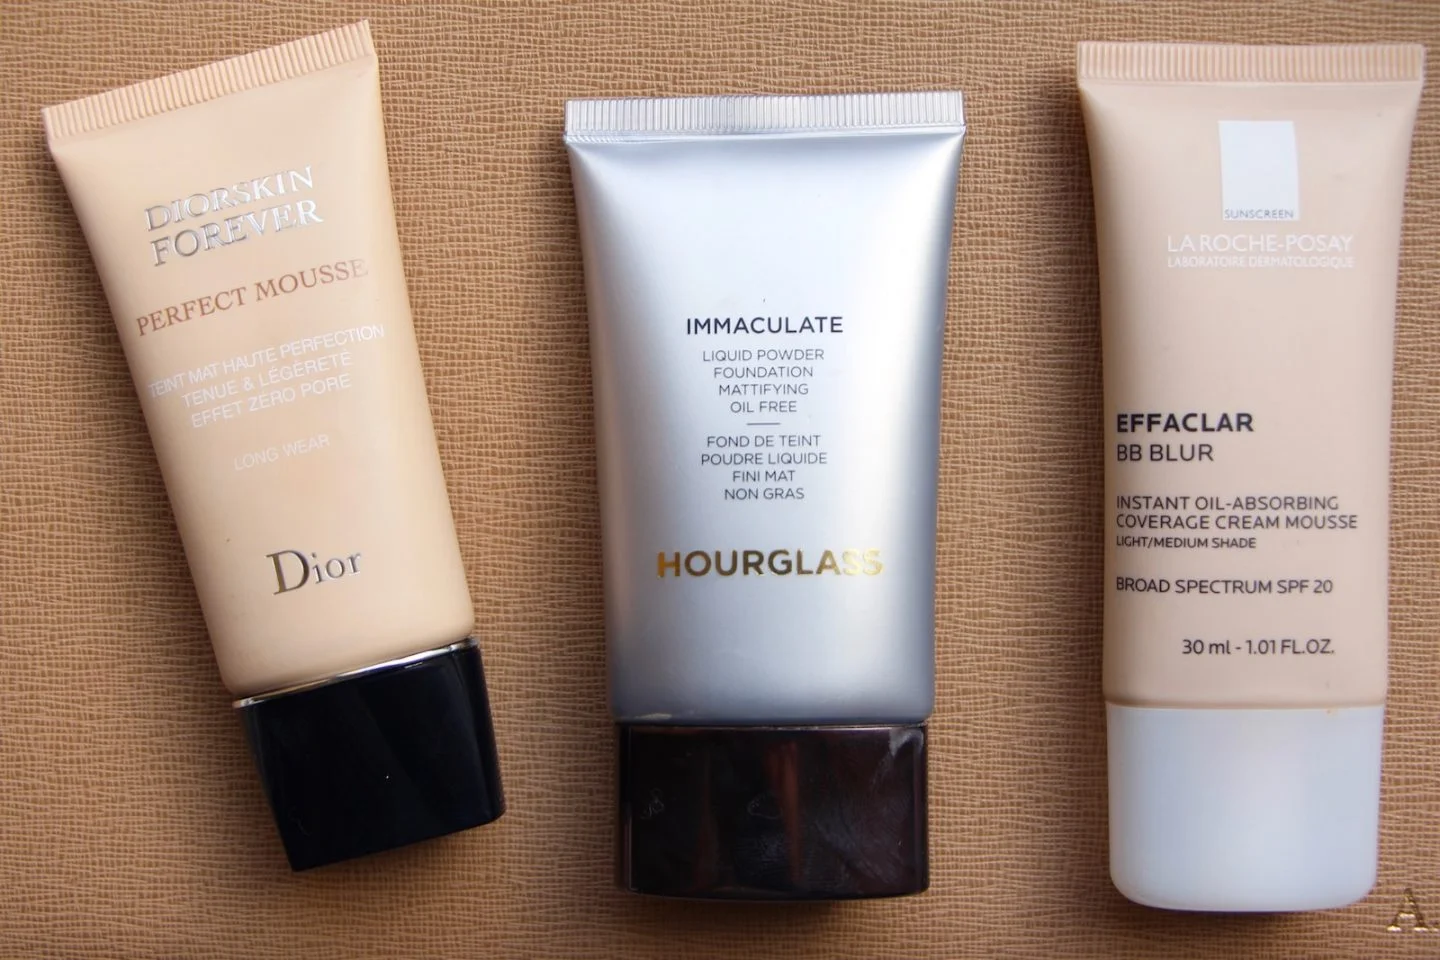 Diorskin Forever Perfect Mousse Foundation Review